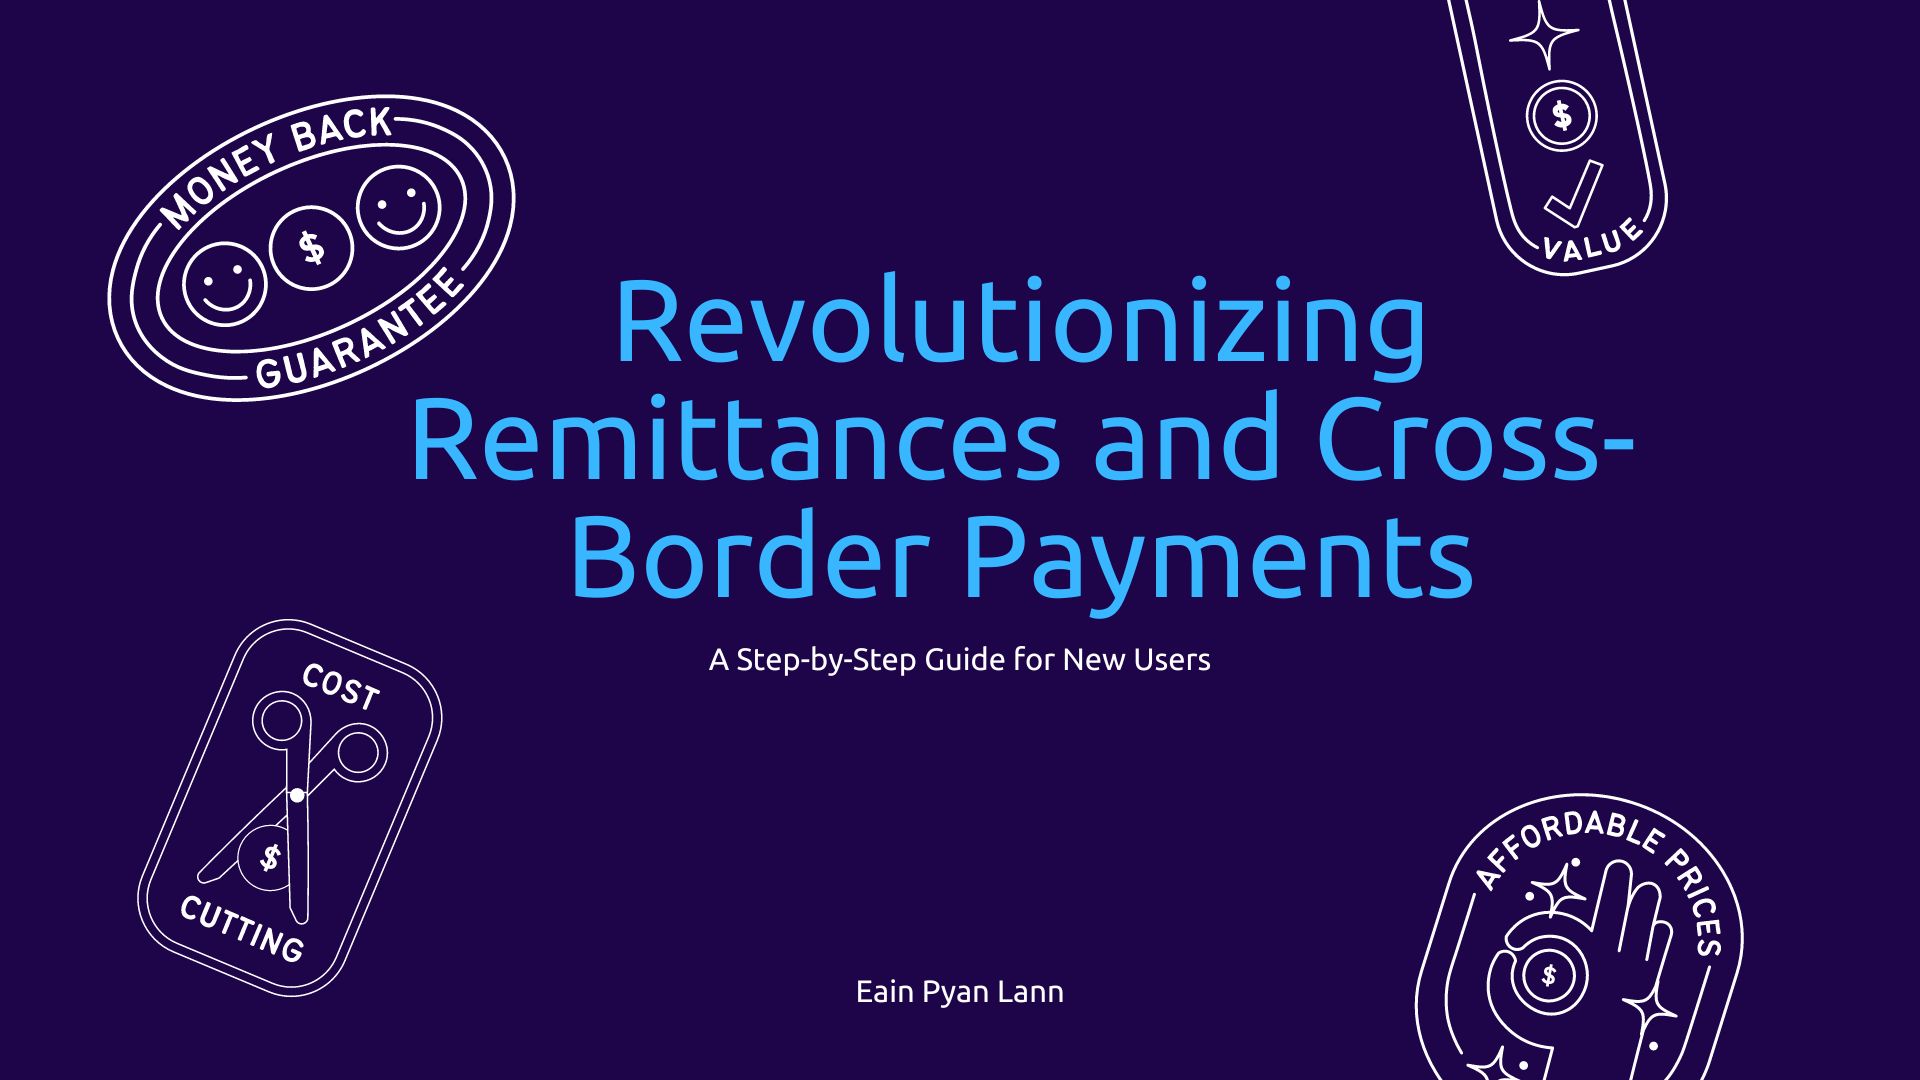 Revolutionizing Remittances and Cross-Border Payments